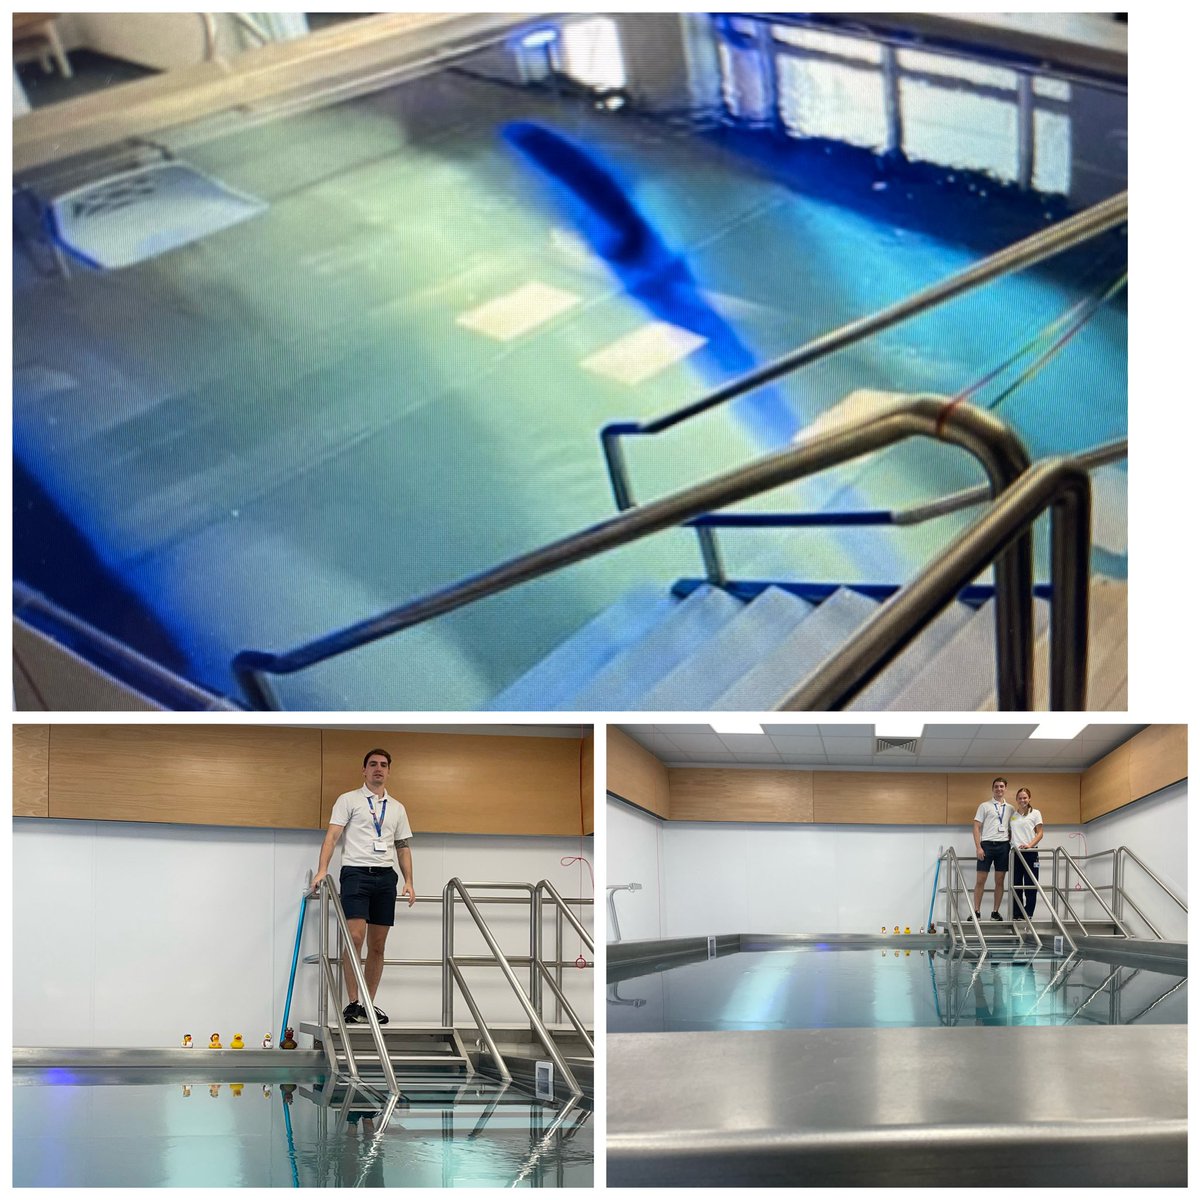 Time well spent today with our Amersham Hospital Physiotherapy Team. Thank you Physiotherapists Tristan & Emily, for showing me the fantastic Hydrotherapy Pool & explaining the clinical value you provide to our patients for best outcomes. @BHTSLT @bhtahp @CHMoss2 #AHPDeliver